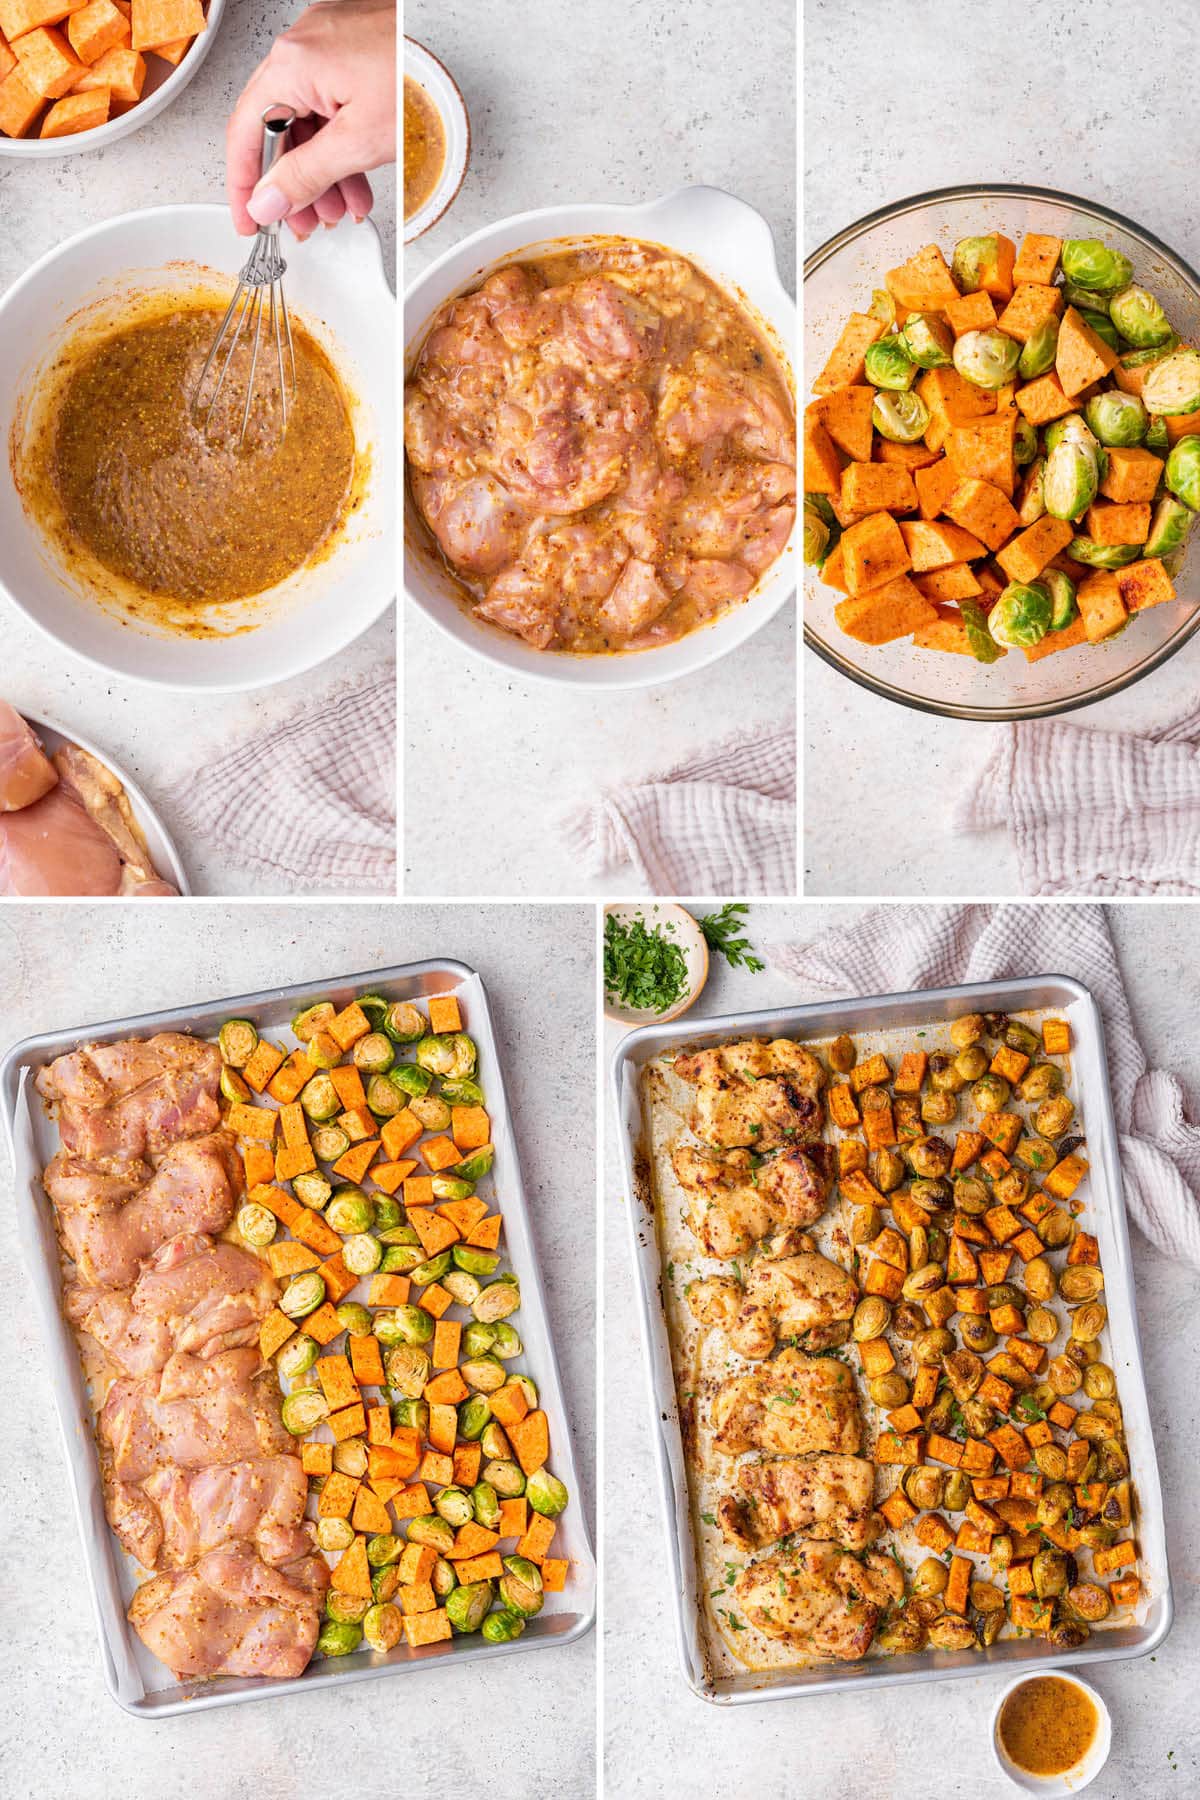 Collage of five photos showing the steps to make Honey Mustard Chicken Sheet Pan Meal: whisking together the honey mustard sauce, marinating the chicken thighs in honey mustard, tossing the chopped sweet potatoes and brussels sprouts in seasoning, and then adding the food to a sheet pan to roast.